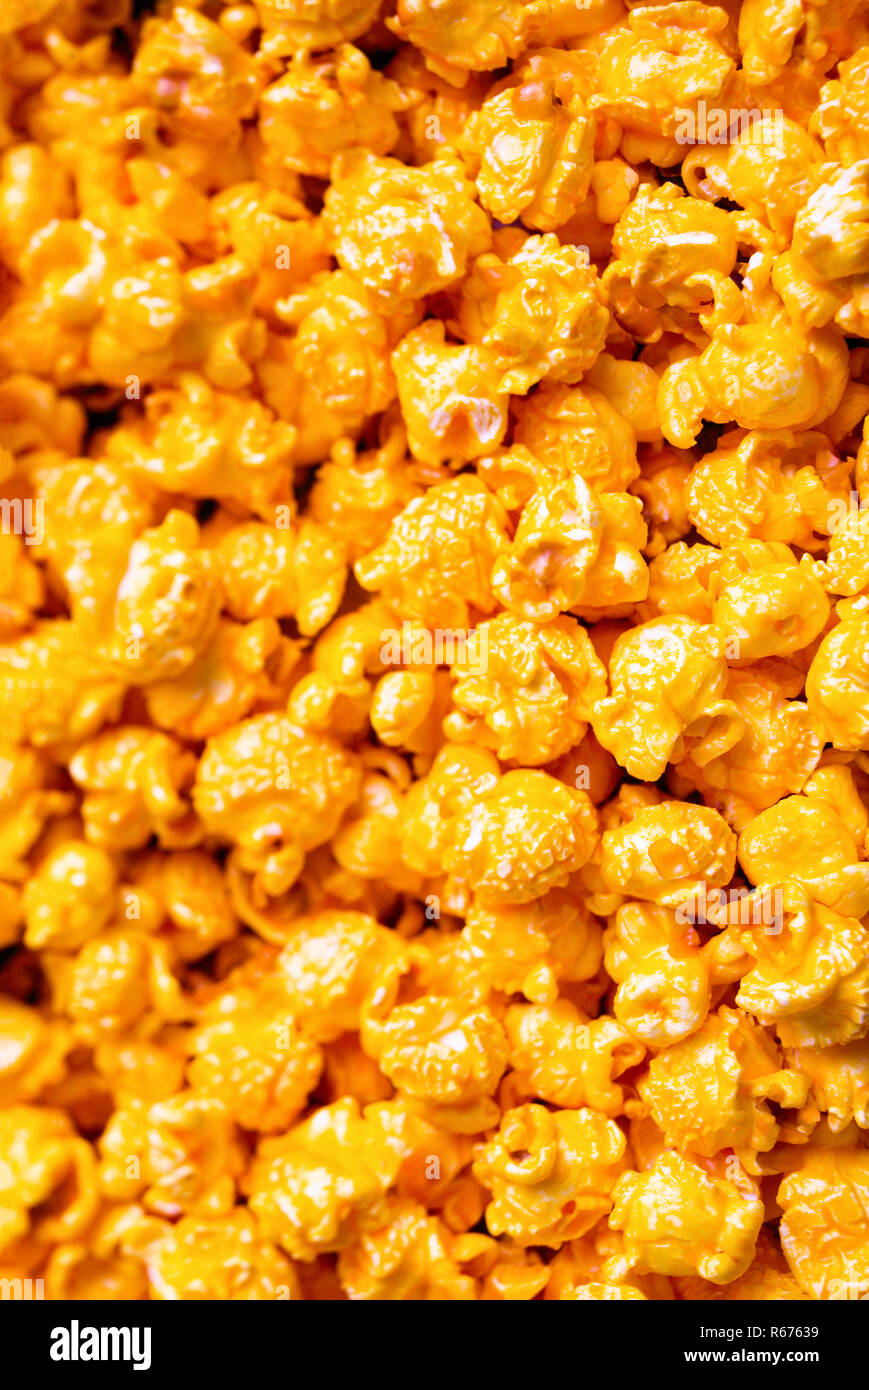 golden cheese popcorn food background Stock Photo